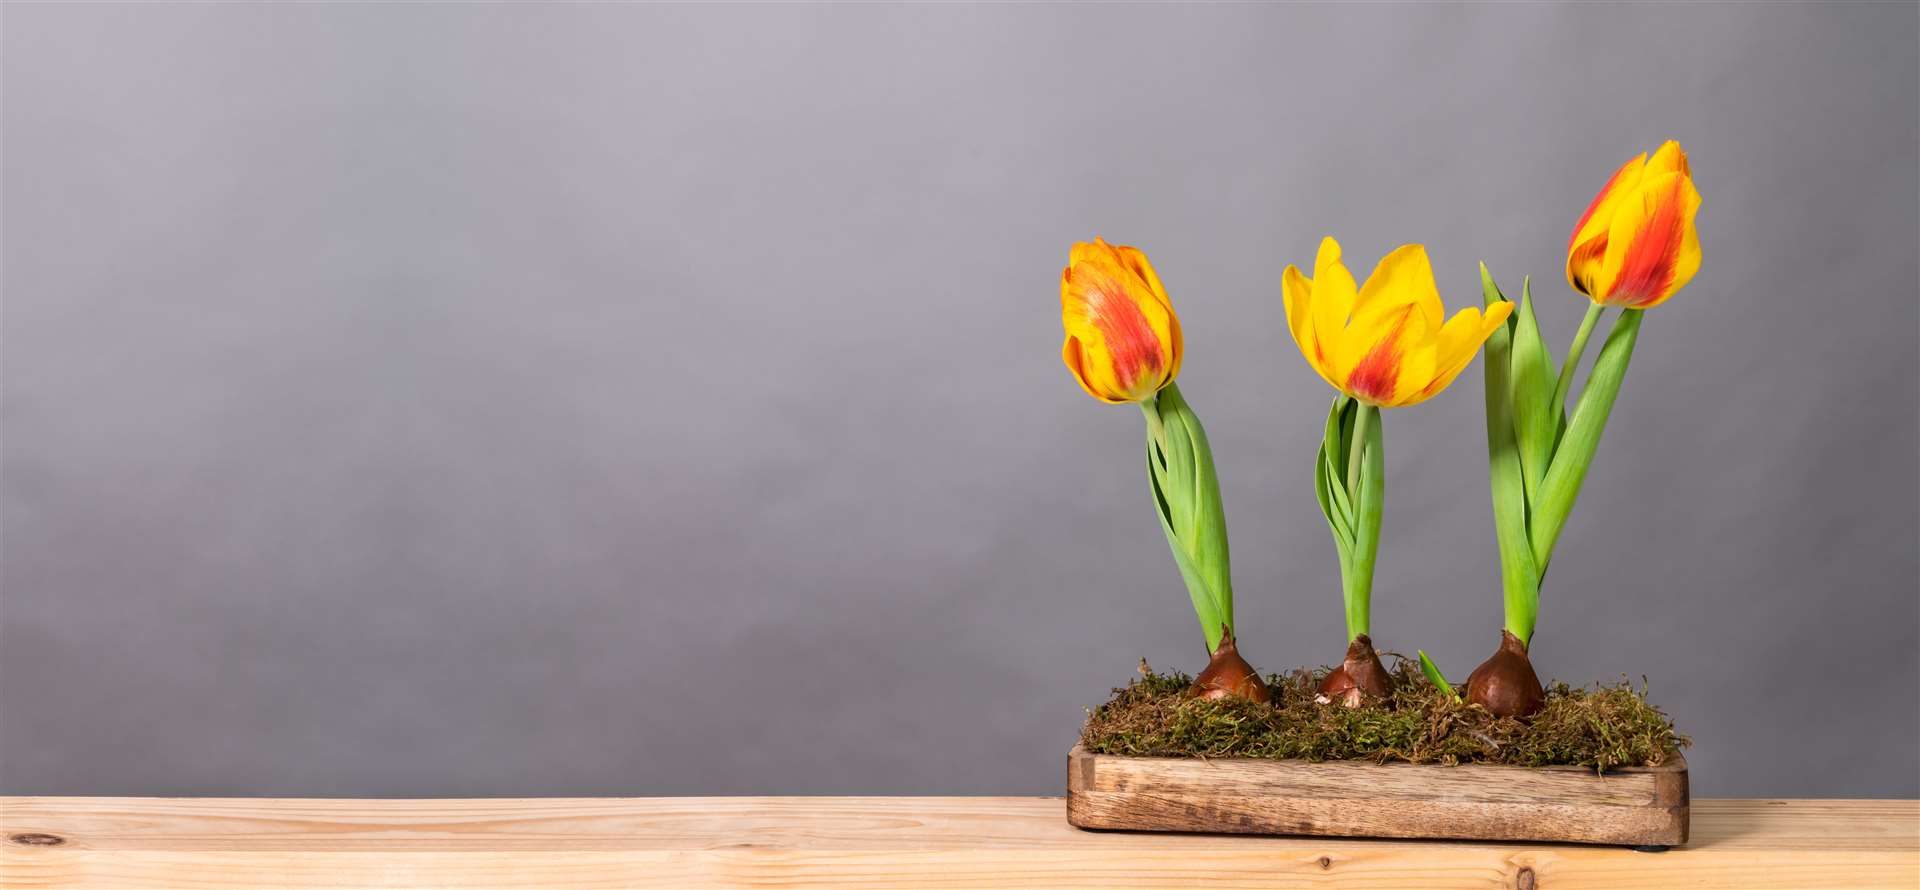 Anyone who wants to enter Drumbeg Gardening Club's Spring bulb and Flower Show is asked to bring their spring bulbs, flower arrangement or potted plants to Stoer Hall on Friday March 15 between 1.30pm and 2pm.